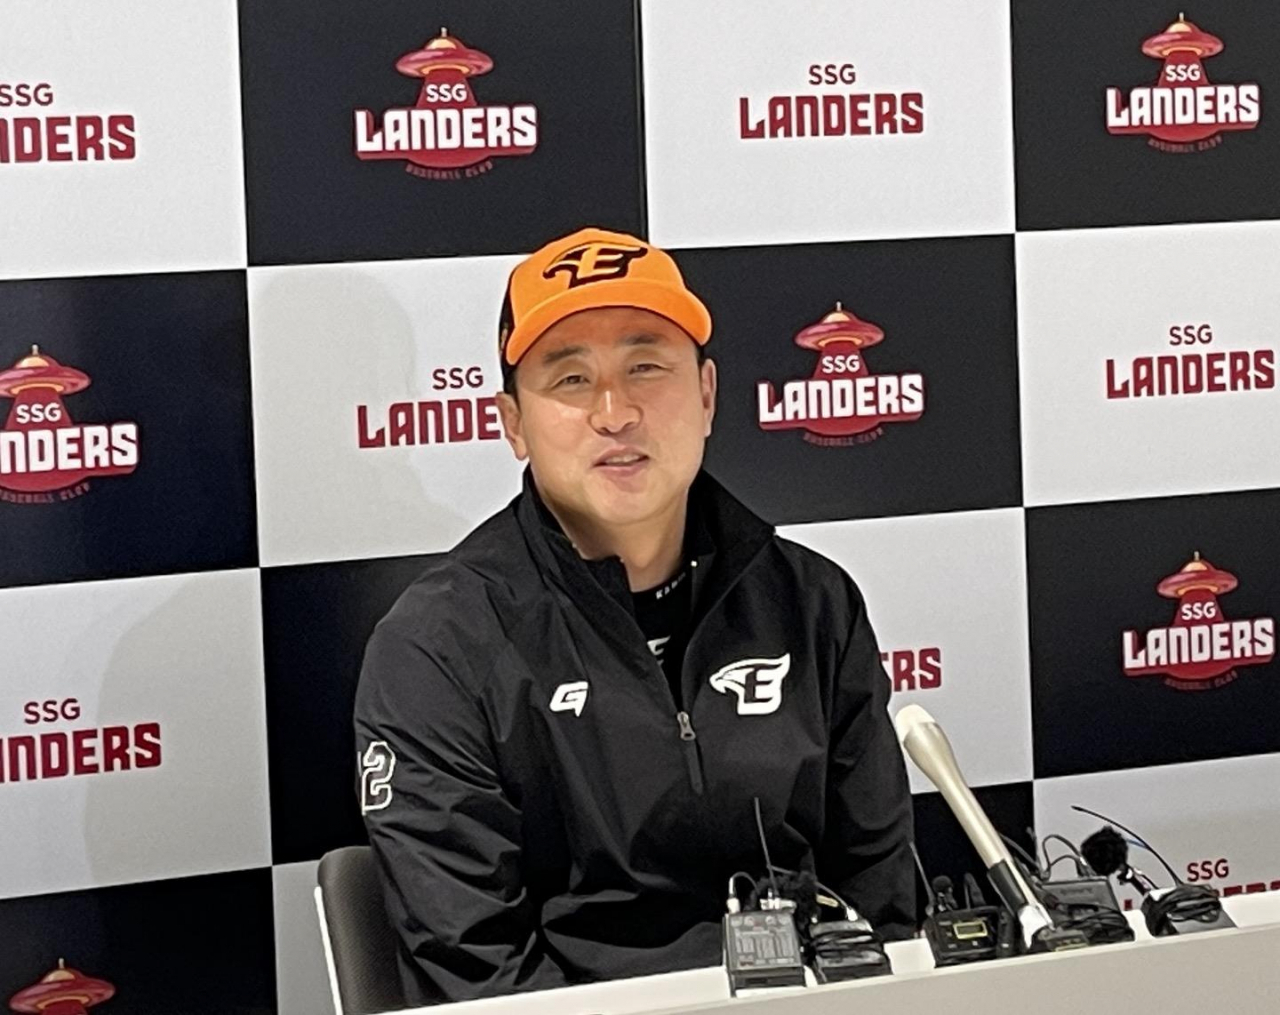 New Hanwha Eagles manager Choi Won-ho speaks at his introductory press conference at Incheon SSG Landers Field in Incheon, some 30 kilometers west of Seoul, before a Korea Baseball Organization regular season game against the SSG Landers on Friday. (Yonhap)